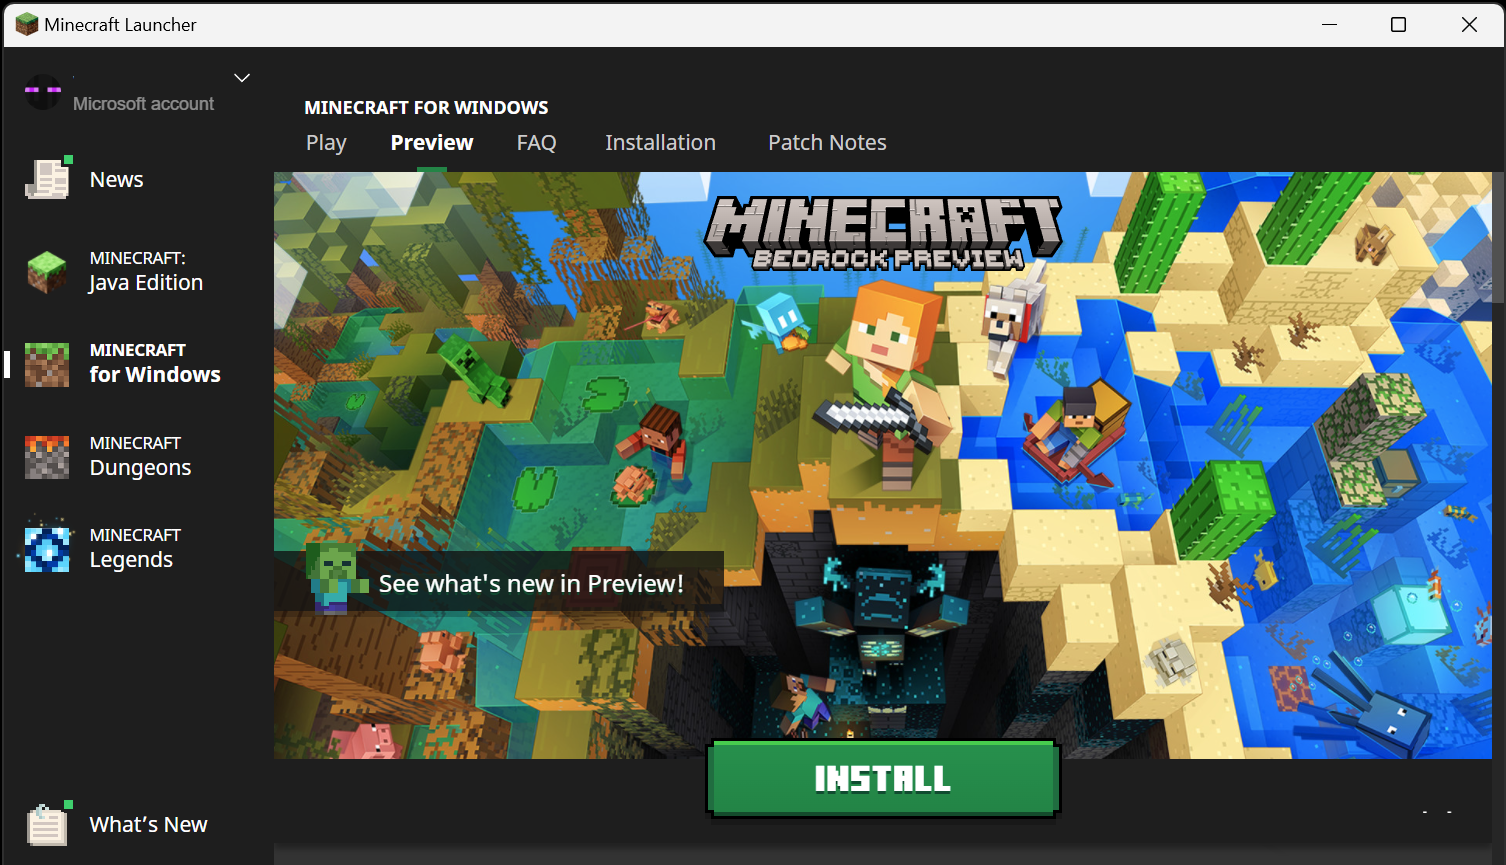 Image of installing Minecraft Bedrock Preview from the Minecraft Launcher